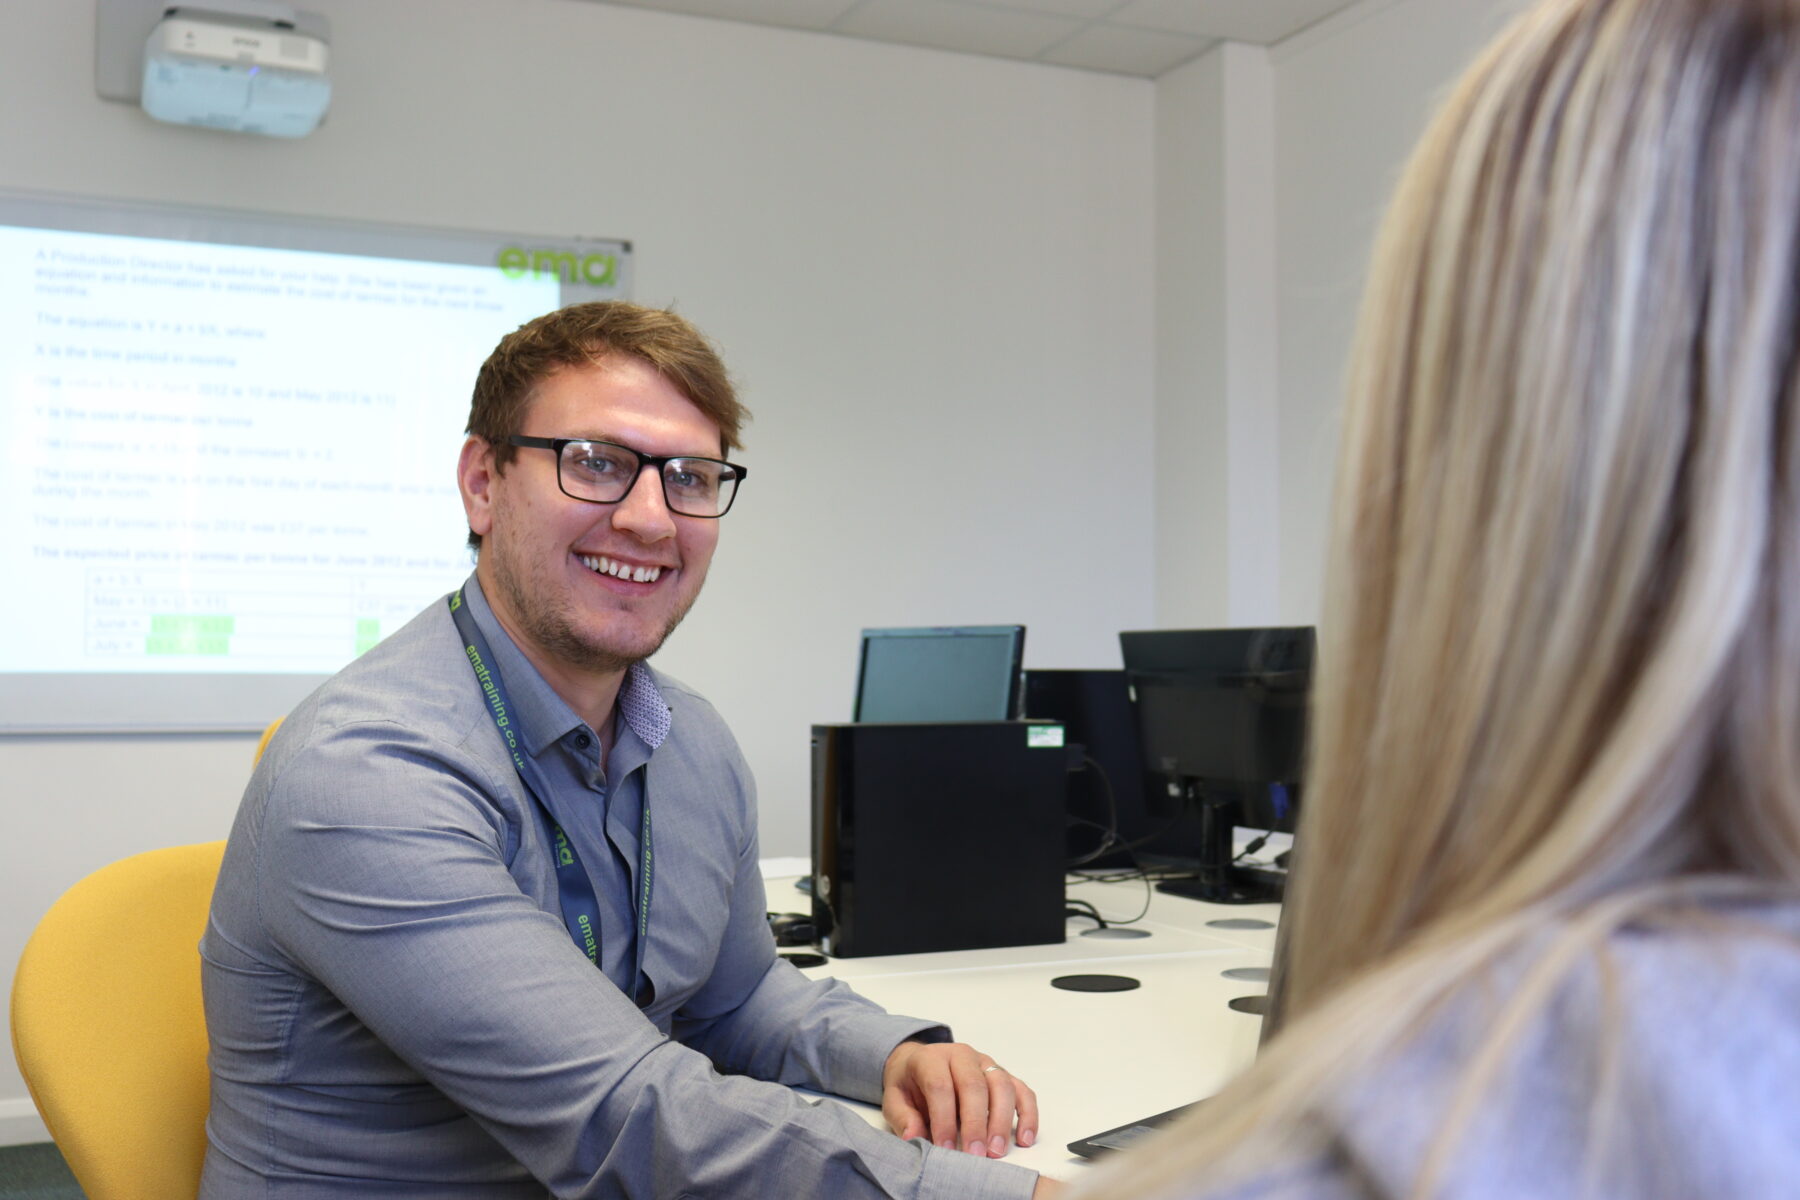 EMA Training Accountancy Mentor, Rob, supporting accountancy apprentice.